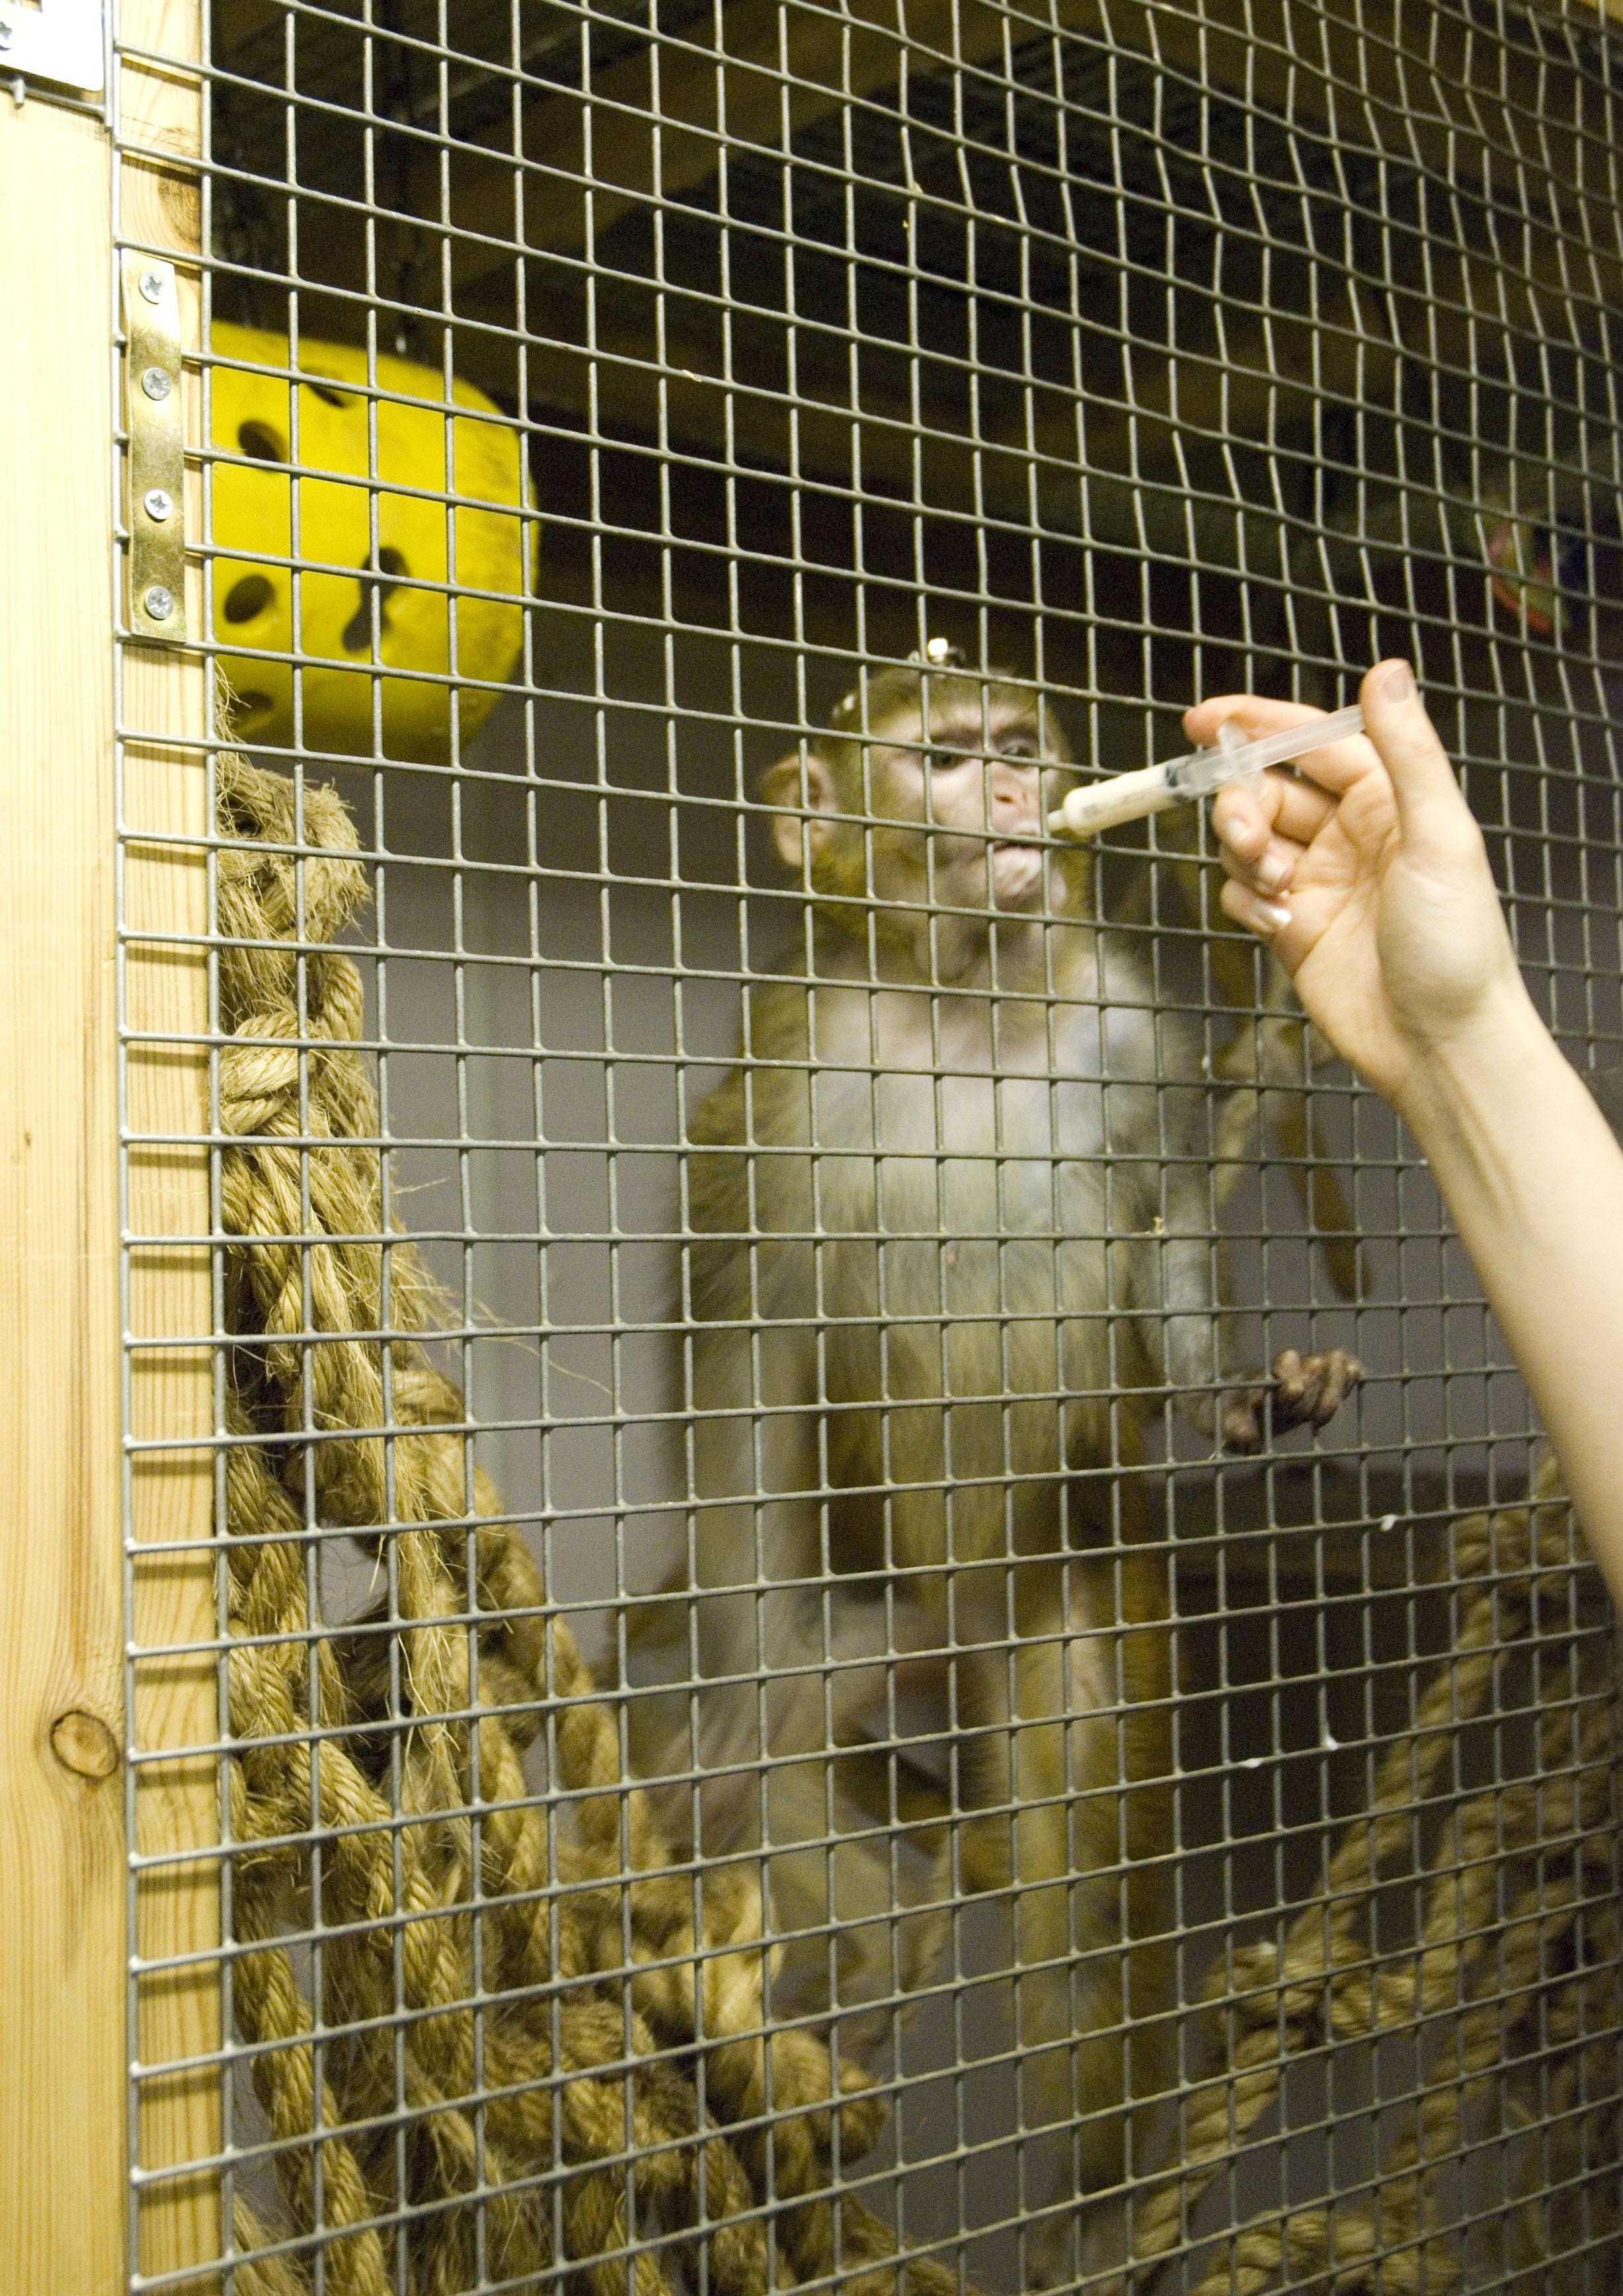 A rhesus macaque receives food from care staff whilst sitting in a wood and mesh enclosure that provides a softer, warmer and less noisy environment.